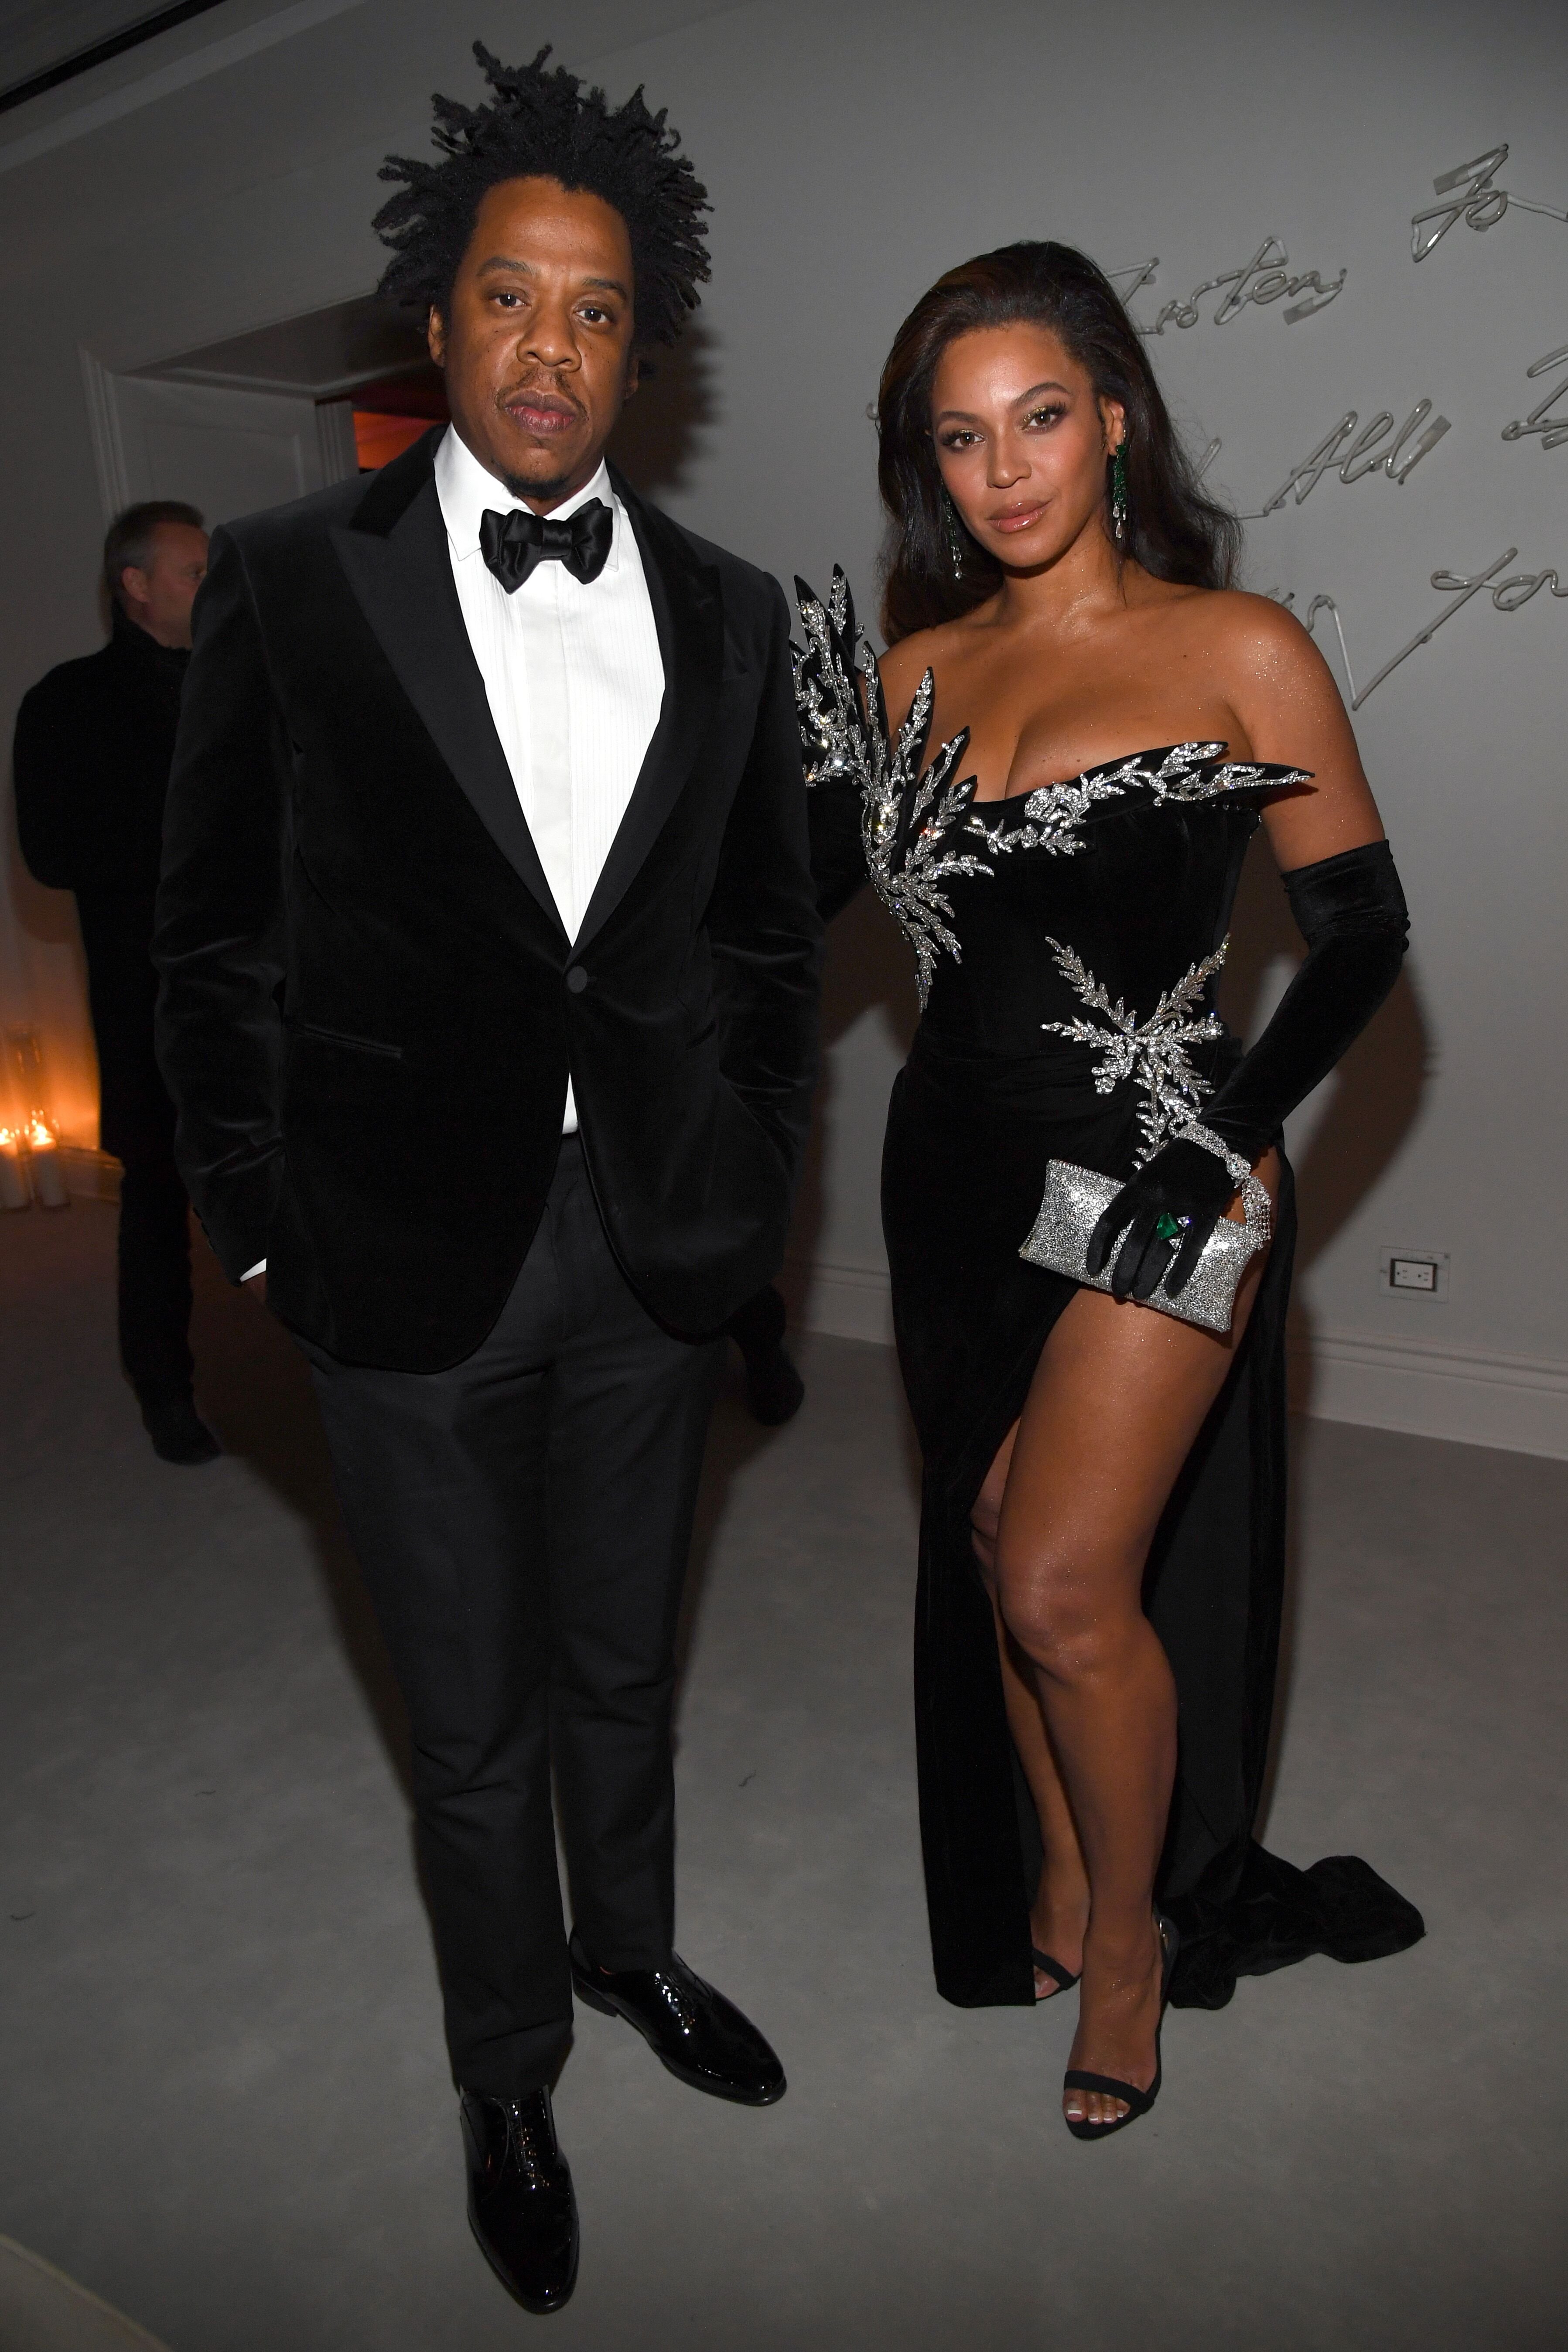 Beyoncé and Jay-Z at Sean "Diddy" Combs' 50th birthday party/ Source: Getty Images